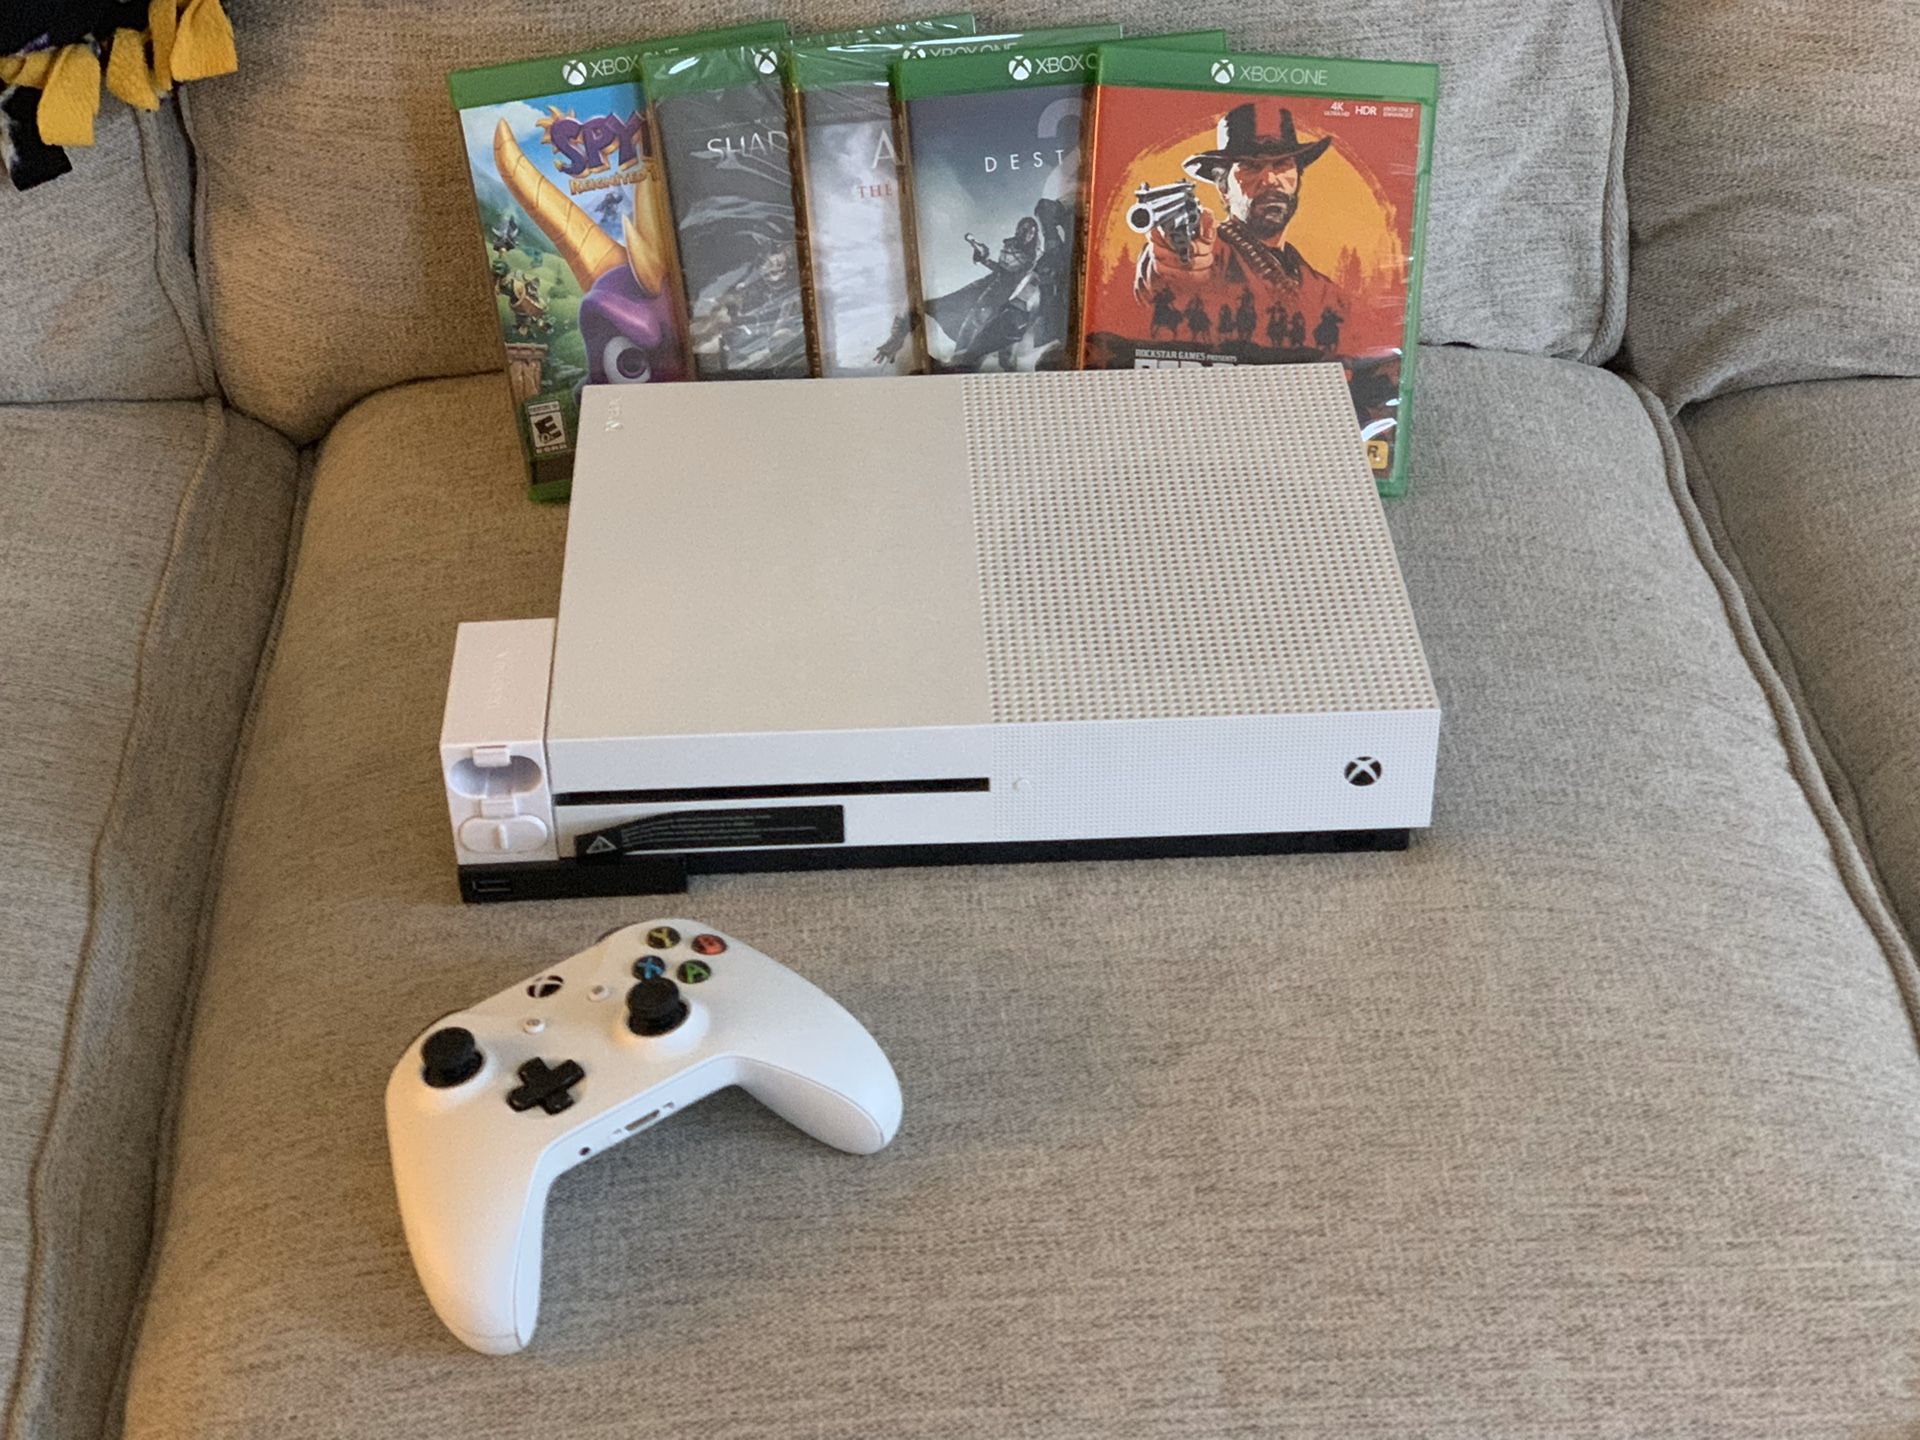 Xbox one with controller charger, games